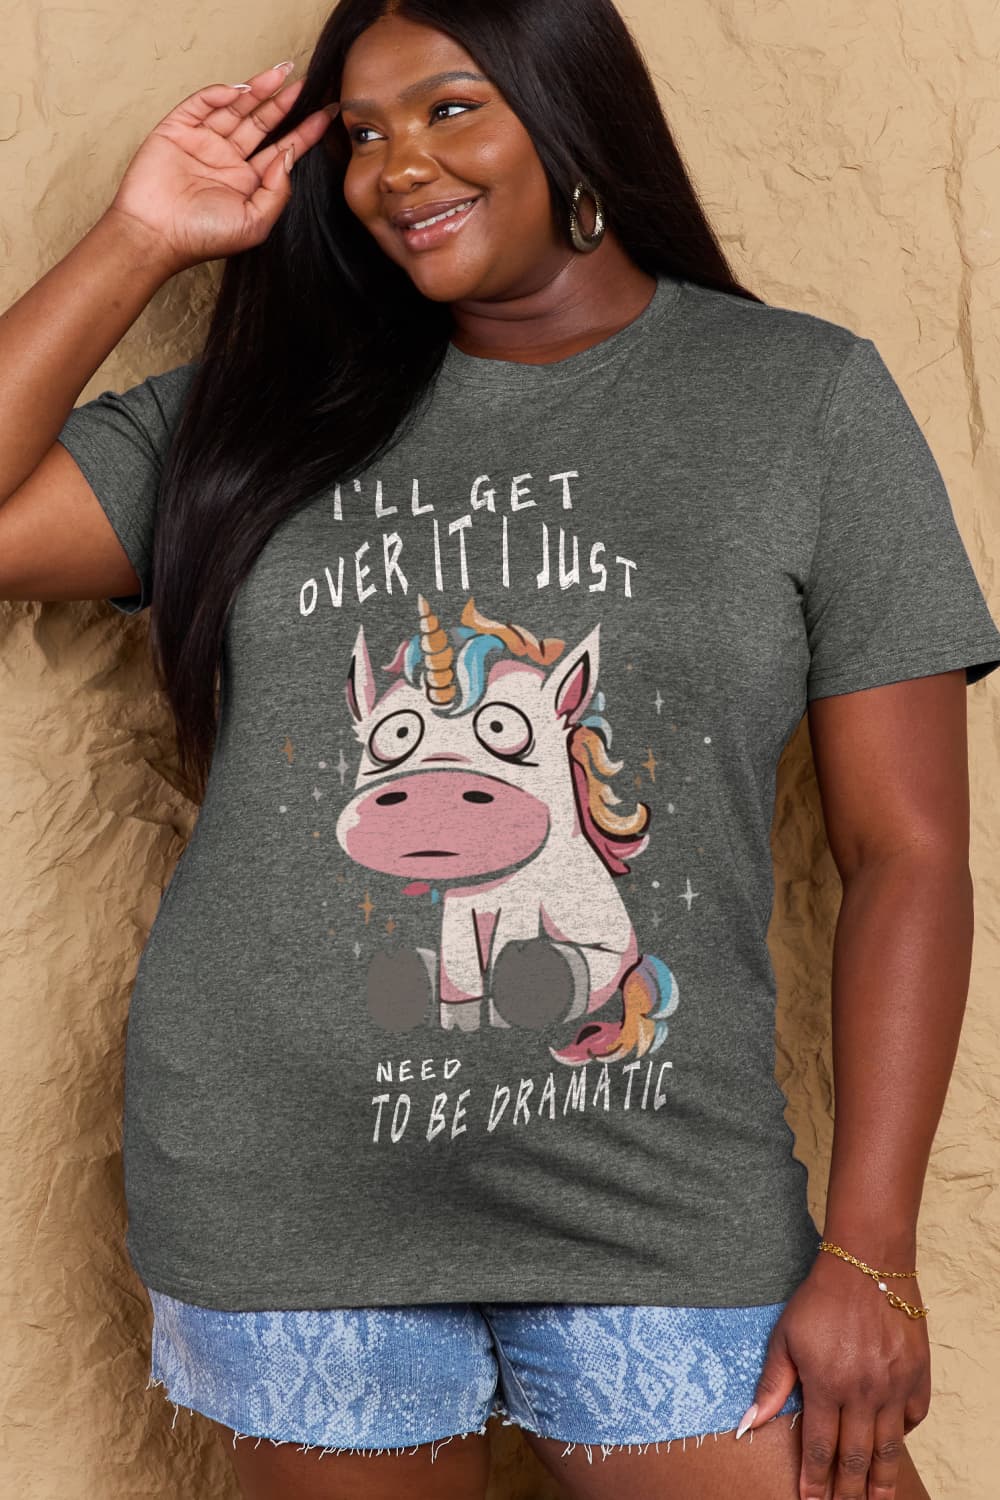 Full Size I’LL GET OVER IT I JUST NEED TO BE DRAMATIC Graphic Cotton Tee - T-Shirts - Shirts & Tops - 11 - 2024